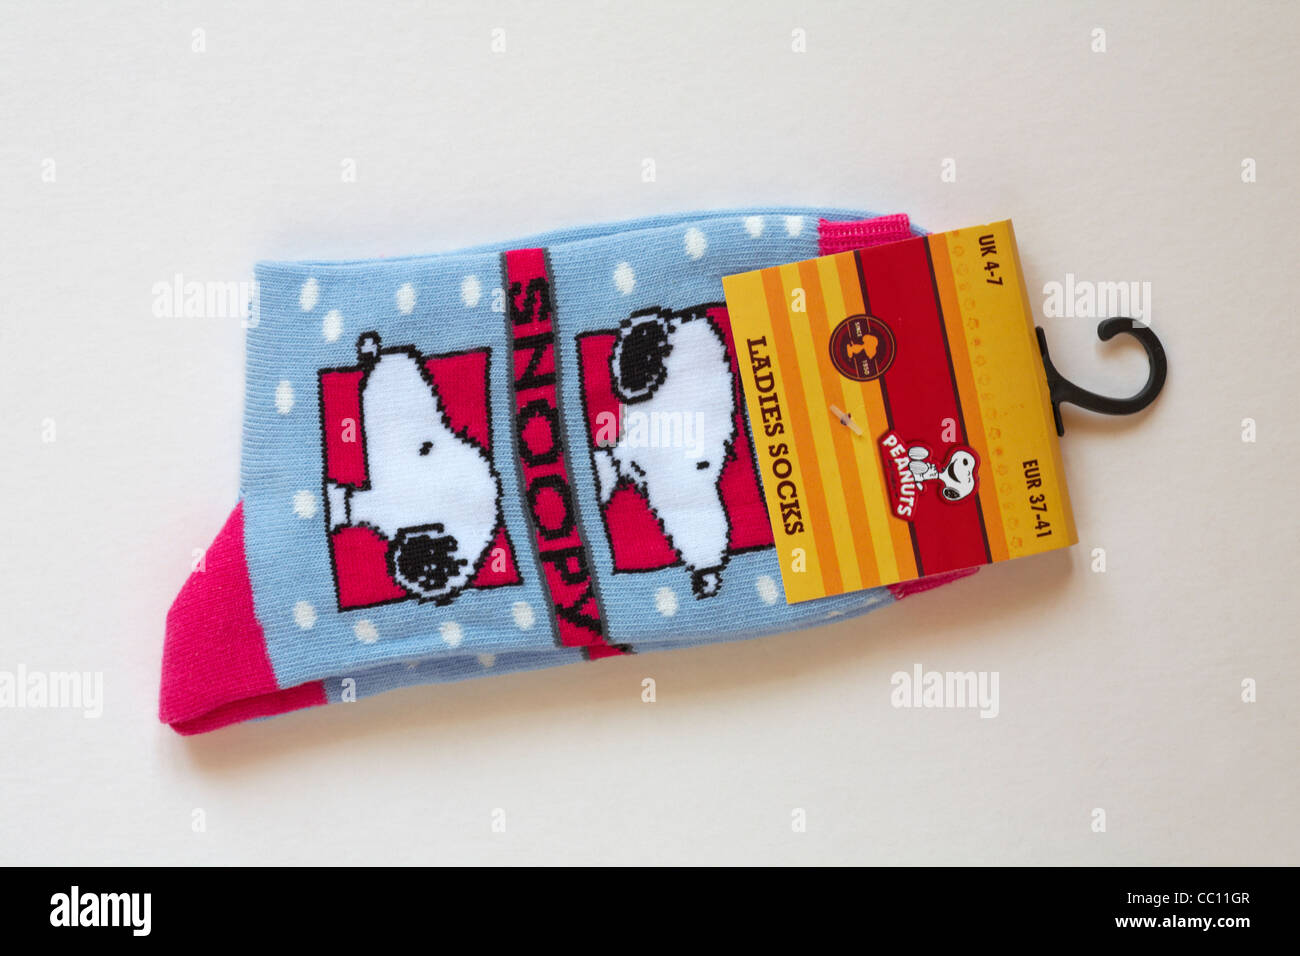 https://c8.alamy.com/comp/CC11GR/pair-of-new-snoopy-ladies-socks-isolated-on-white-background-CC11GR.jpg